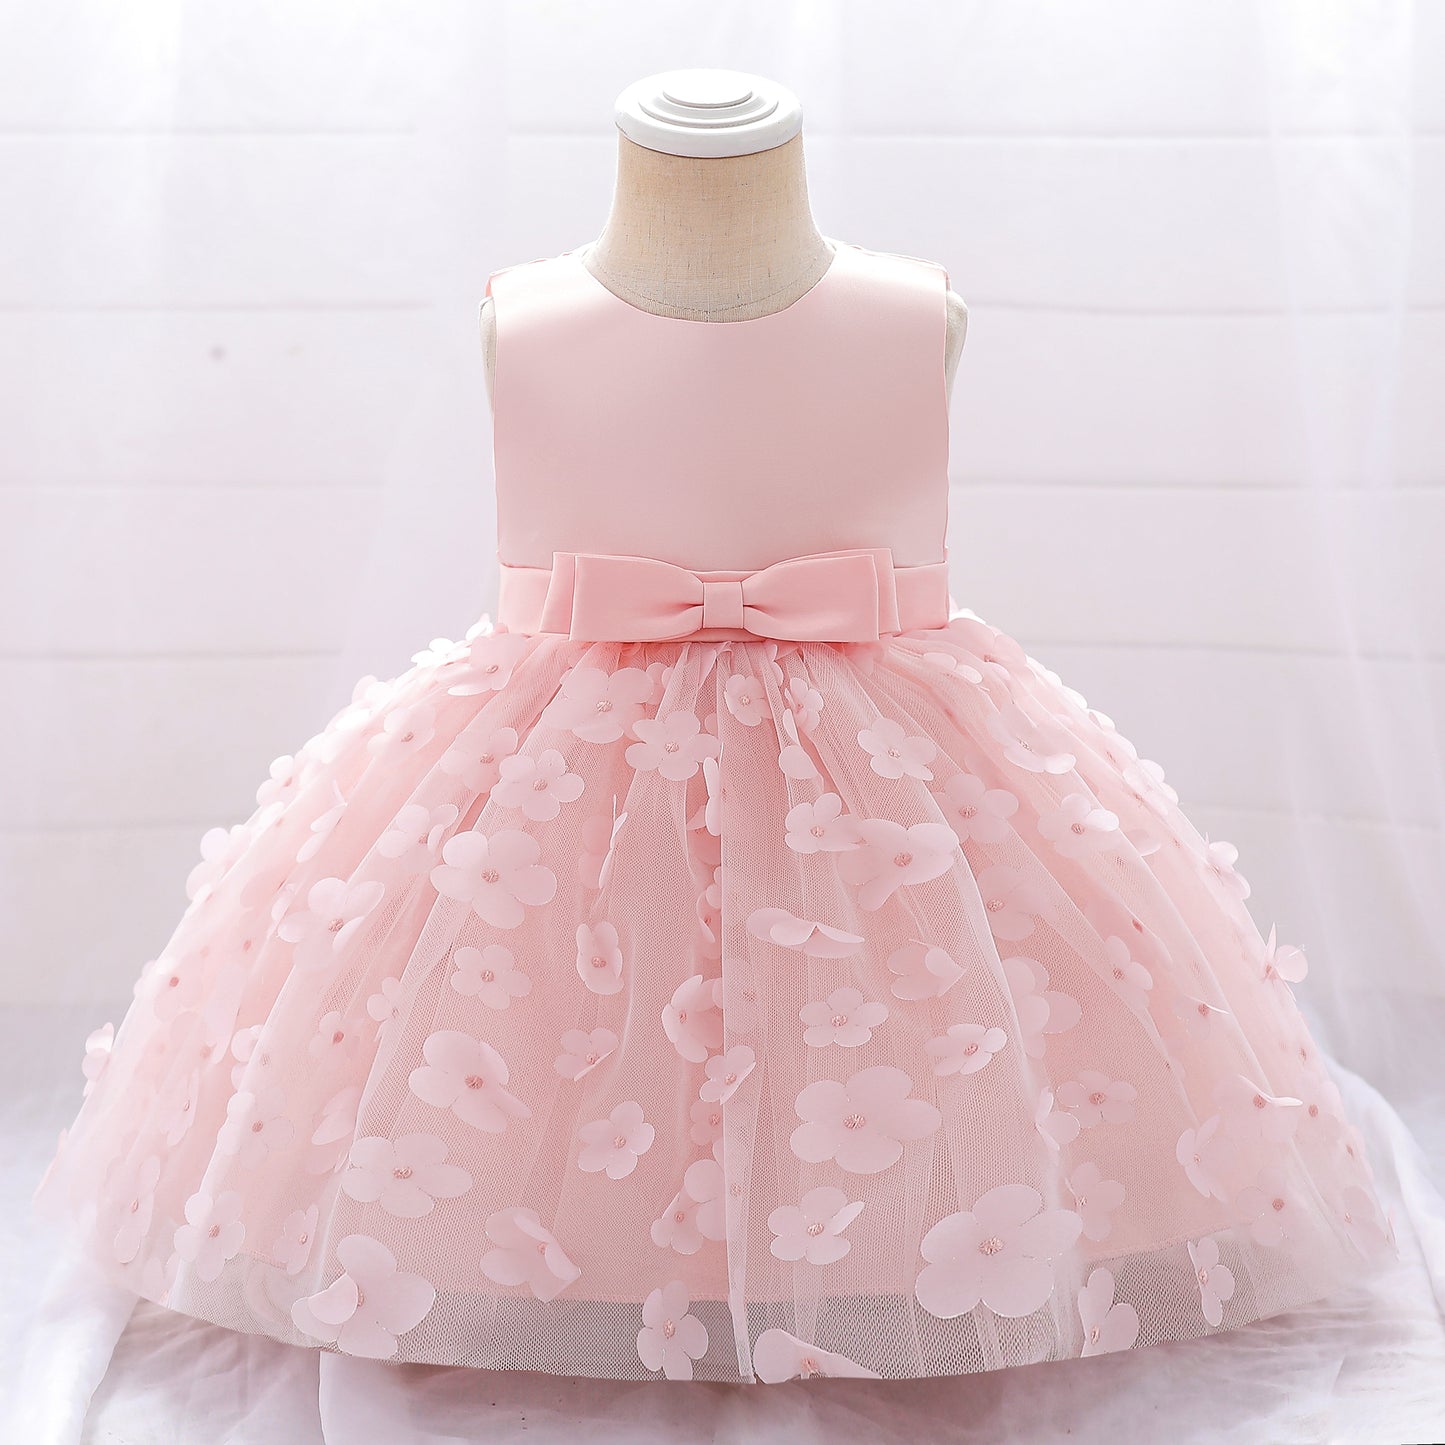 Colorland Younger Kids Party Dress 80-120cm- L2083XZ